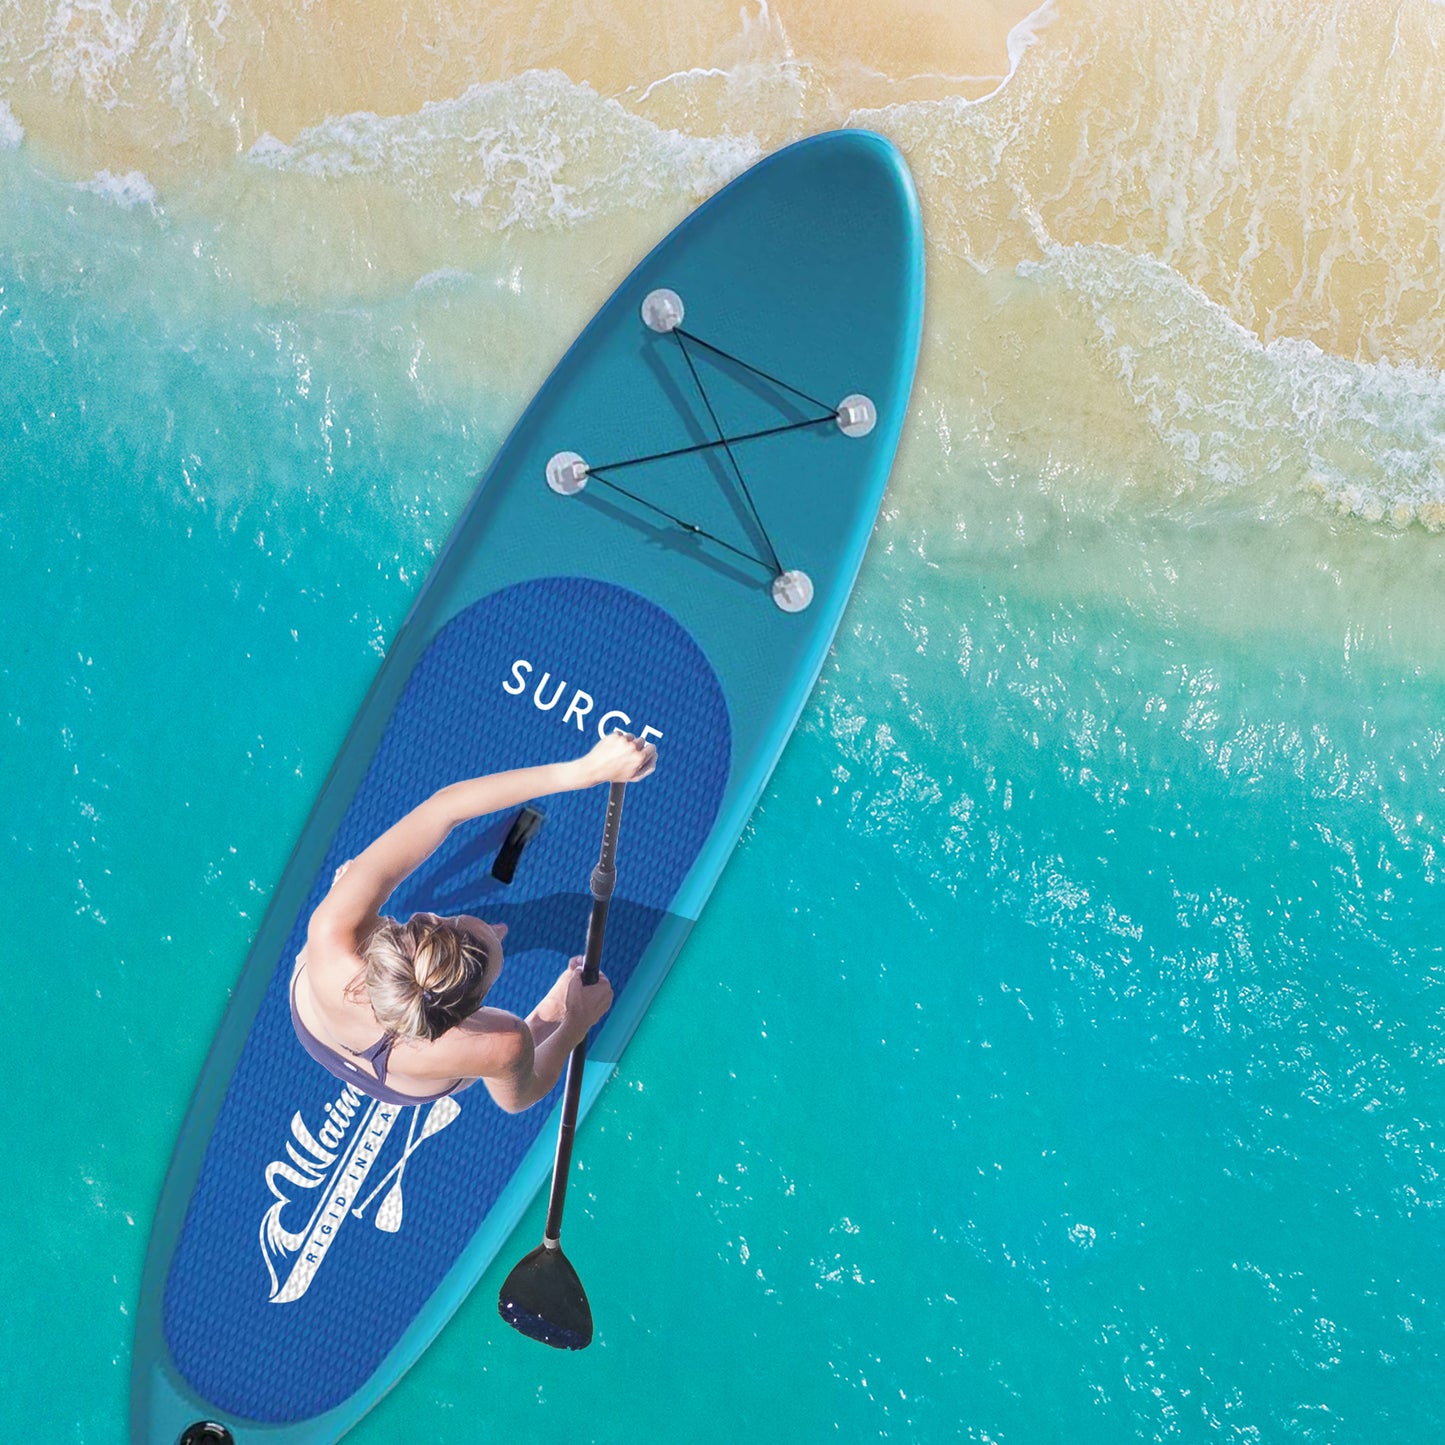 Surge Inflatable Paddleboard